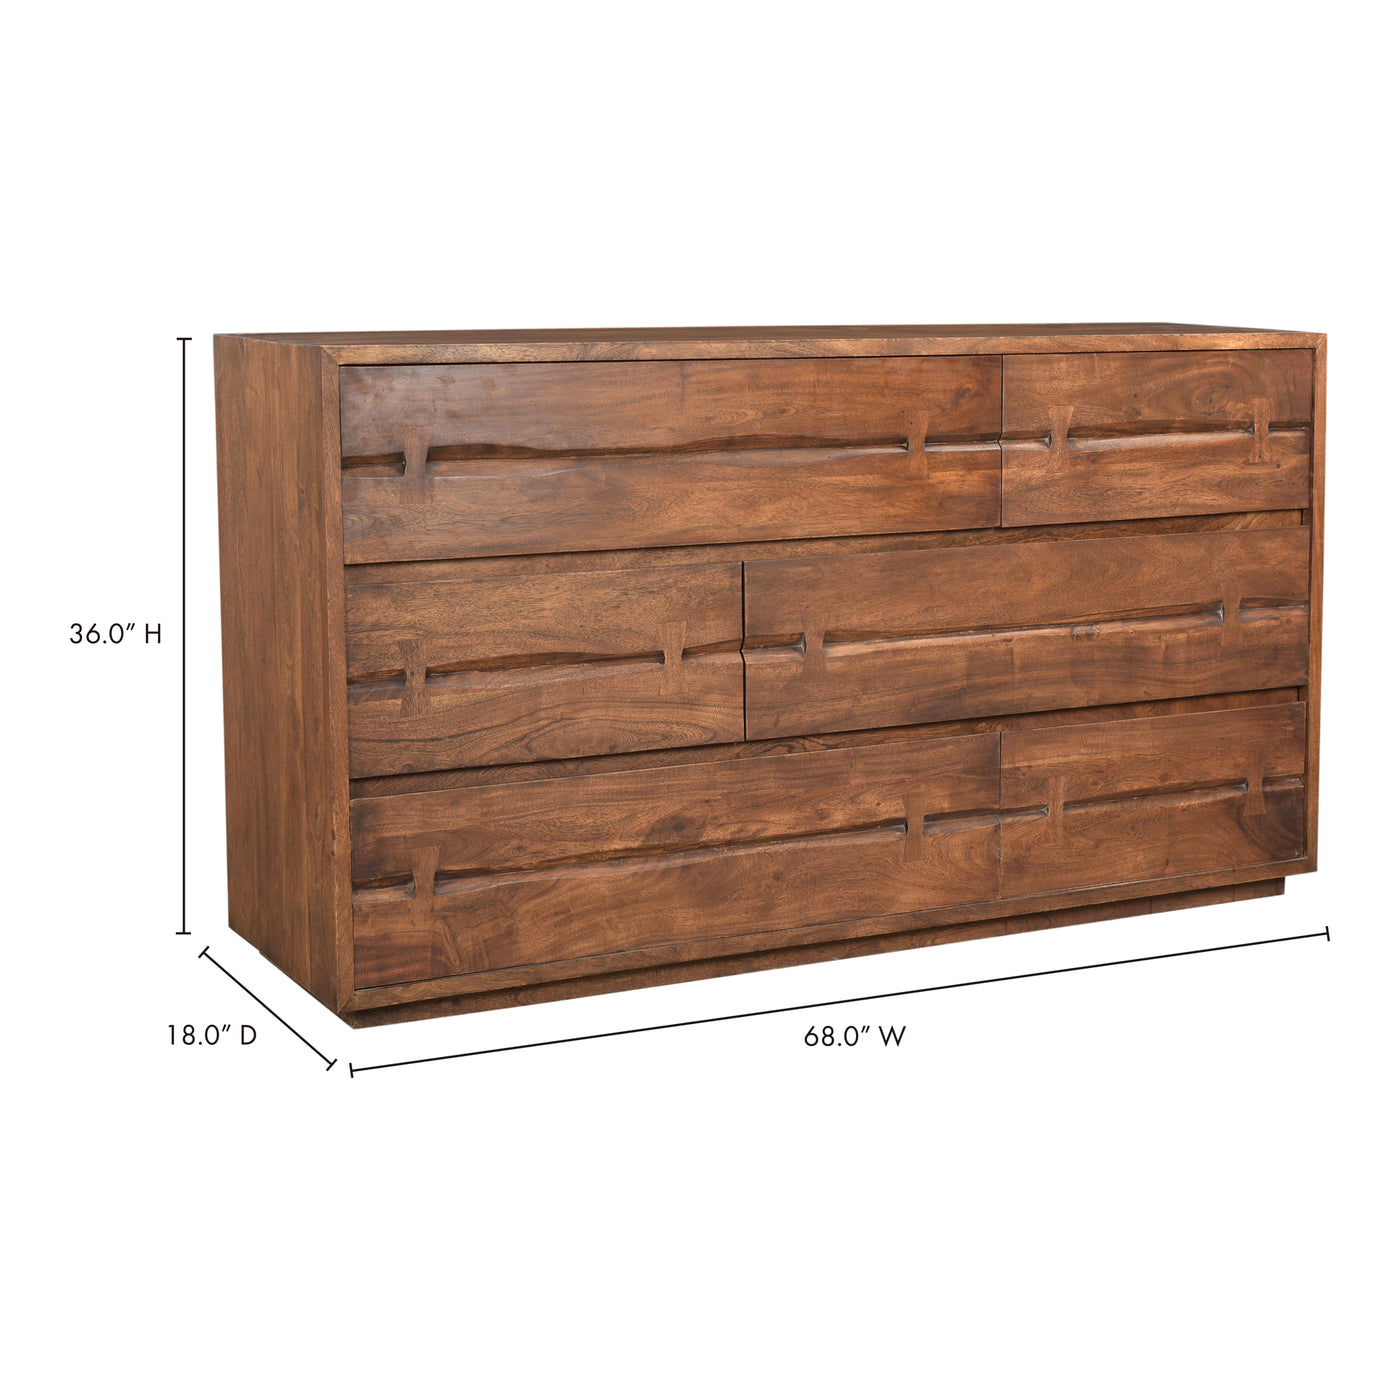 The Madagascar dresser features solid acacia wood construction, mixed with a warm brown finish that highlights its natural...